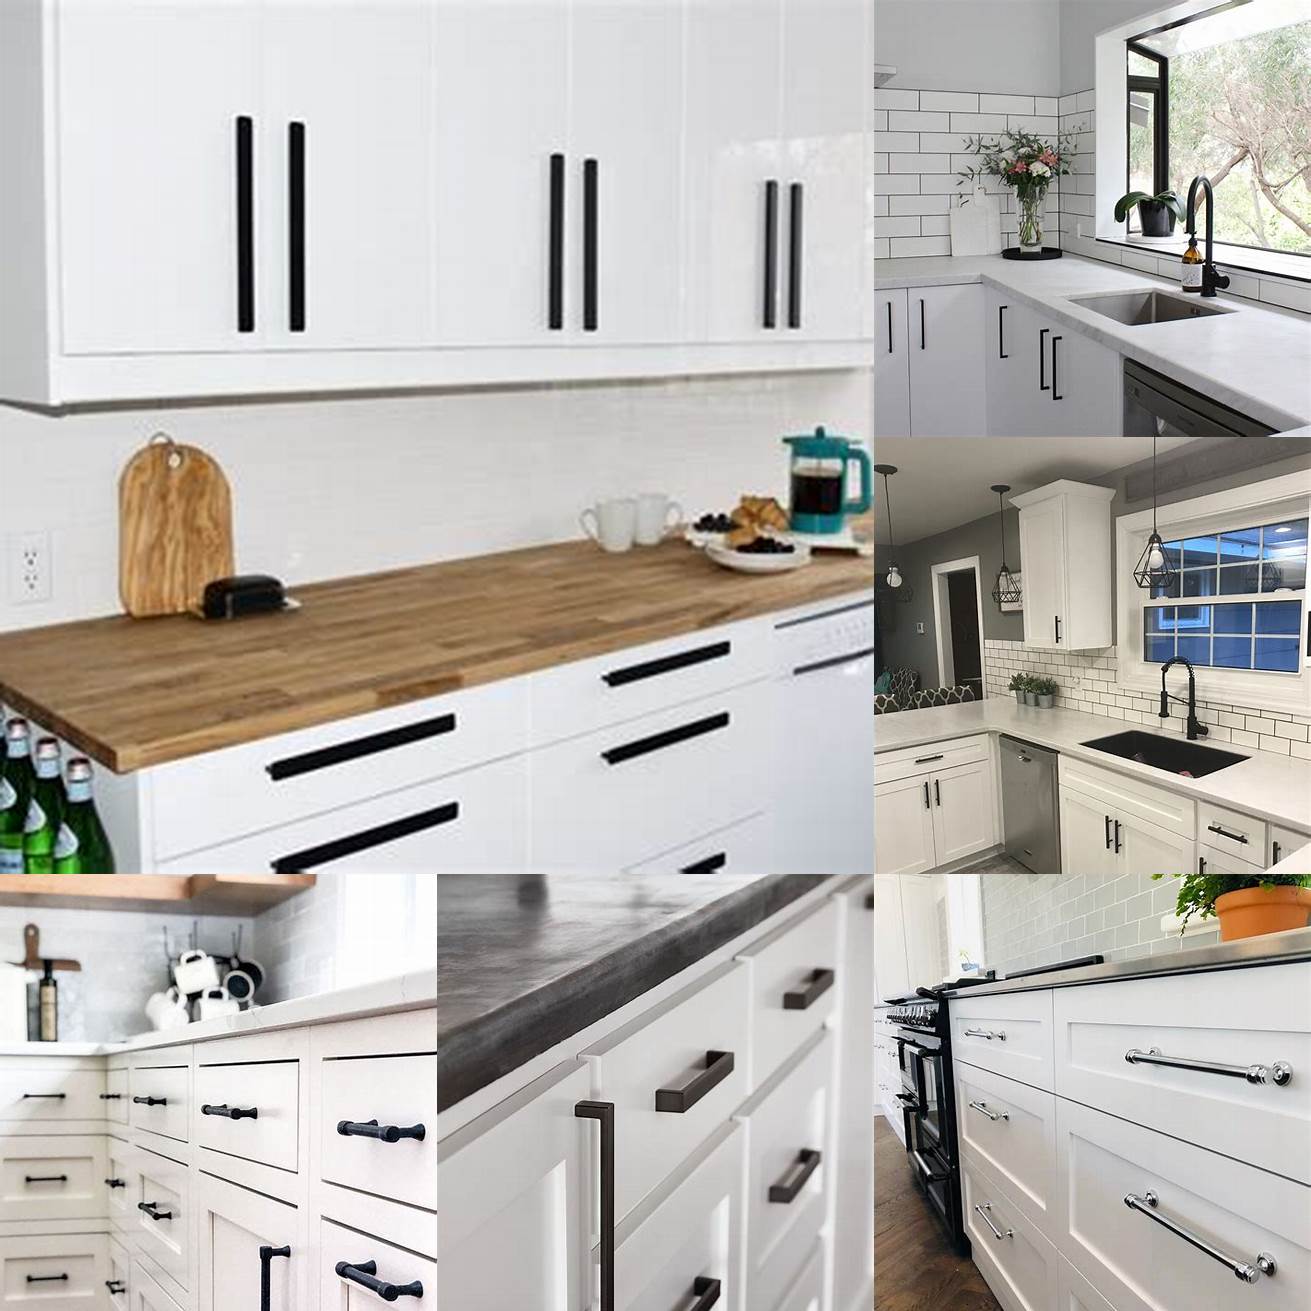 Black Handles If you want to add some contrast to your kitchen black handles on white cabinets can create a bold and modern look This is a great option for those who love a minimalist aesthetic